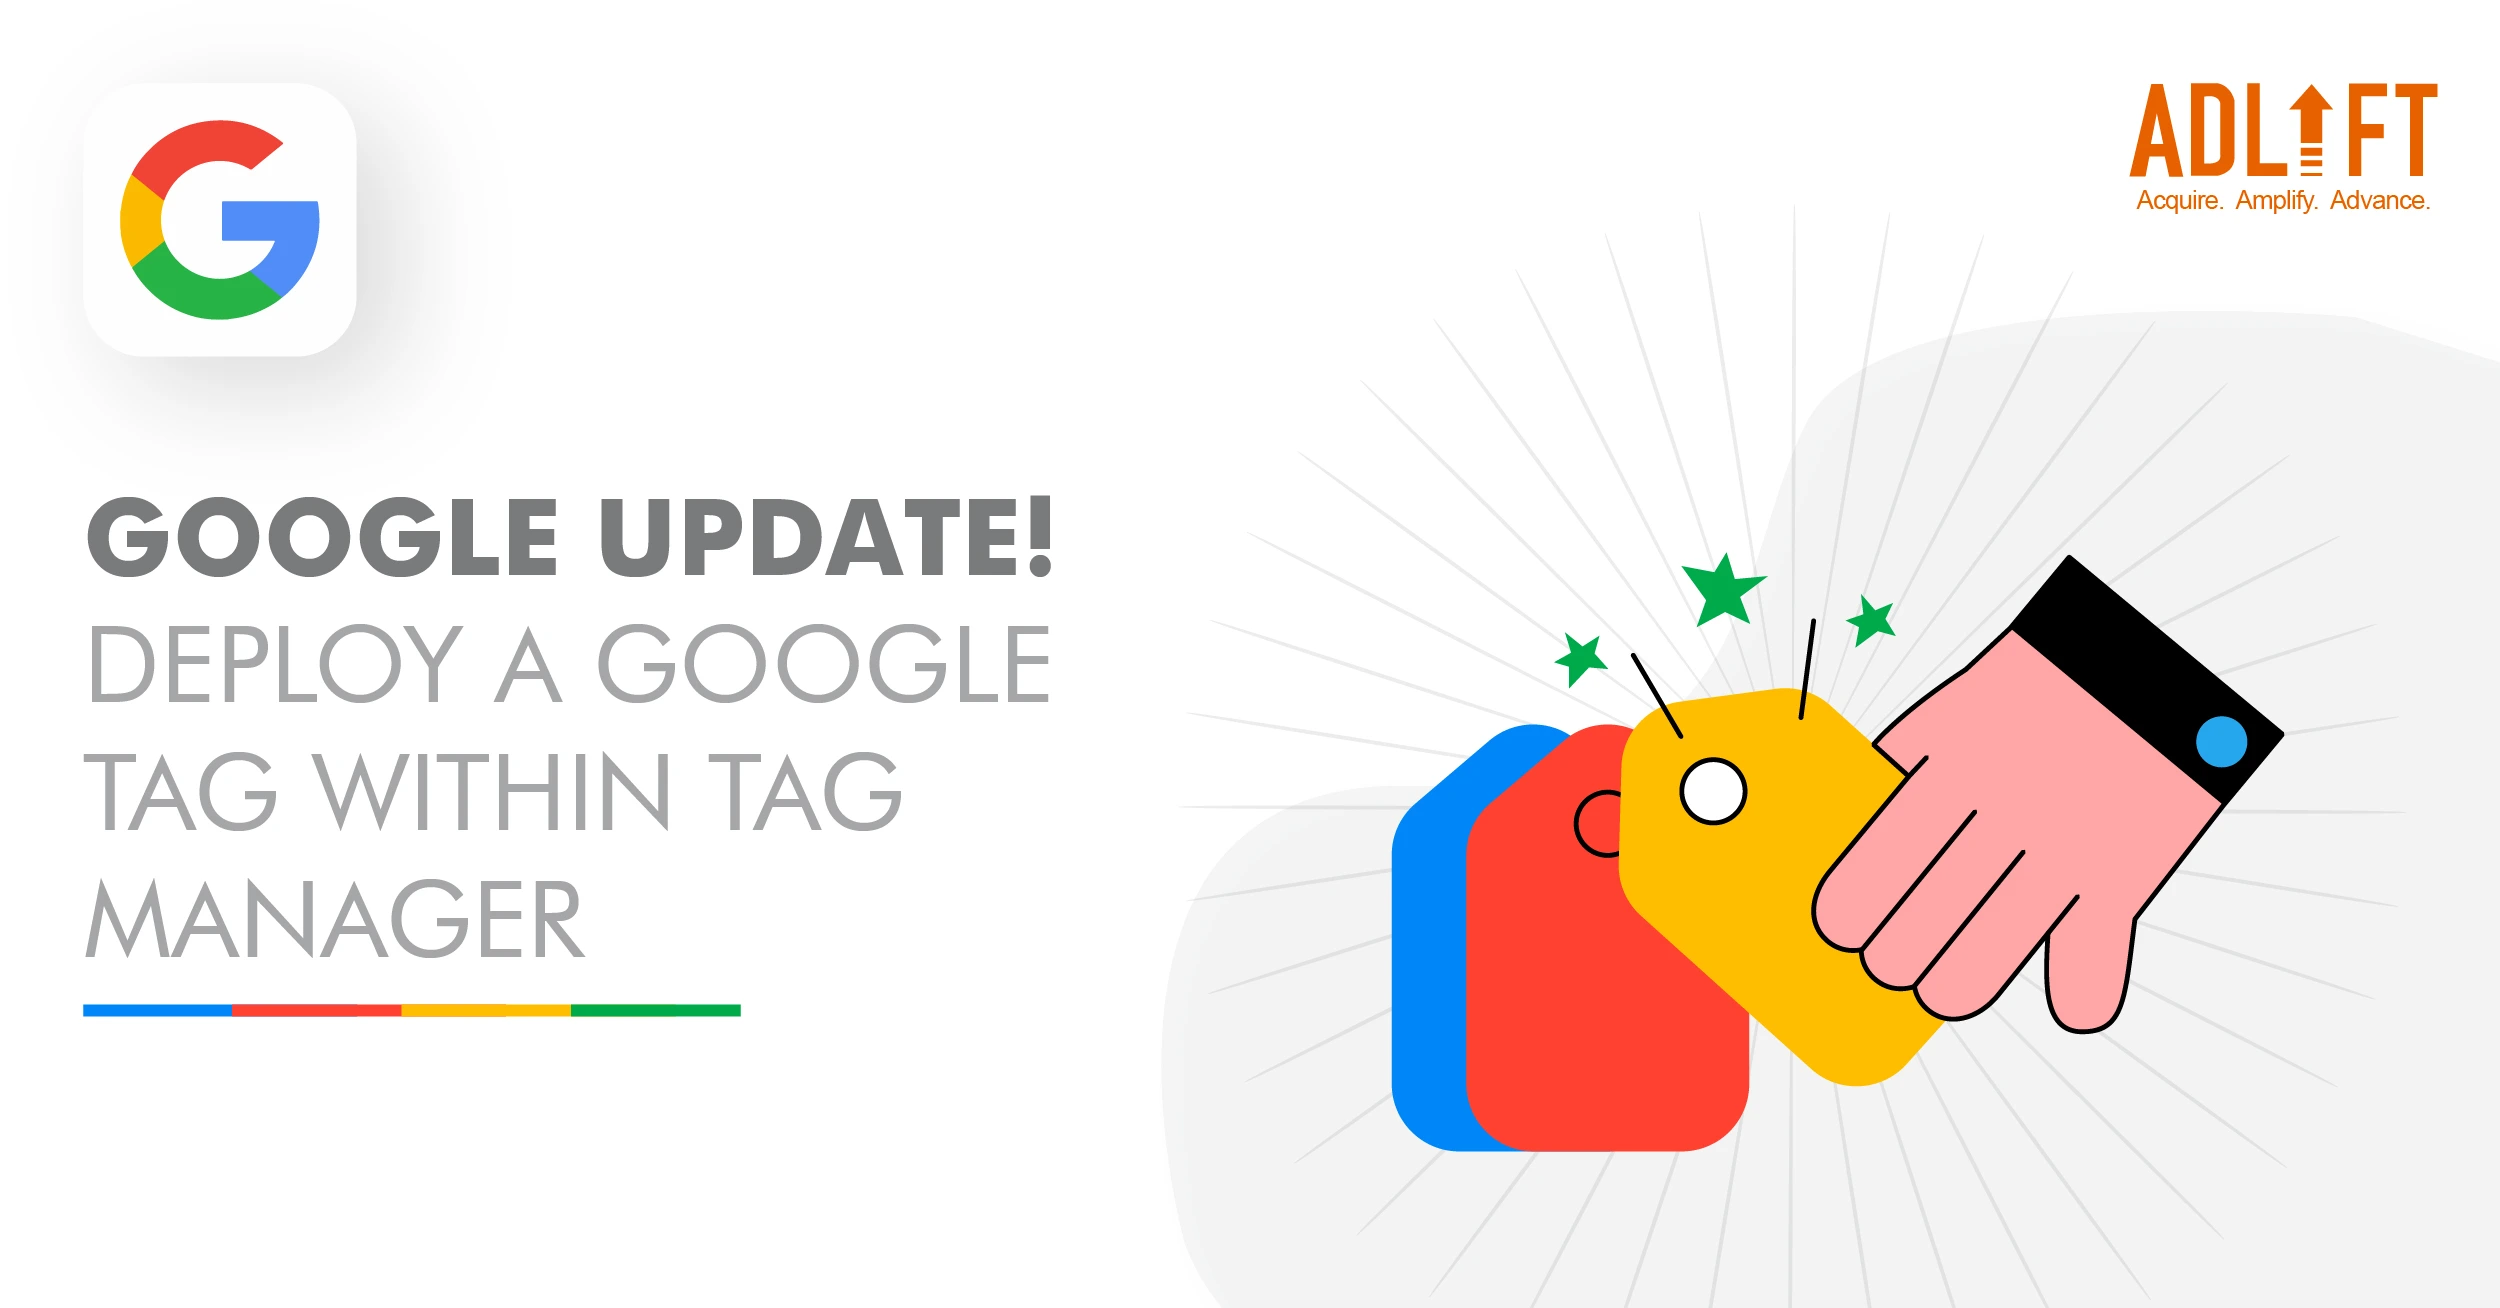 Deploy a Google Tag within Tag Manager